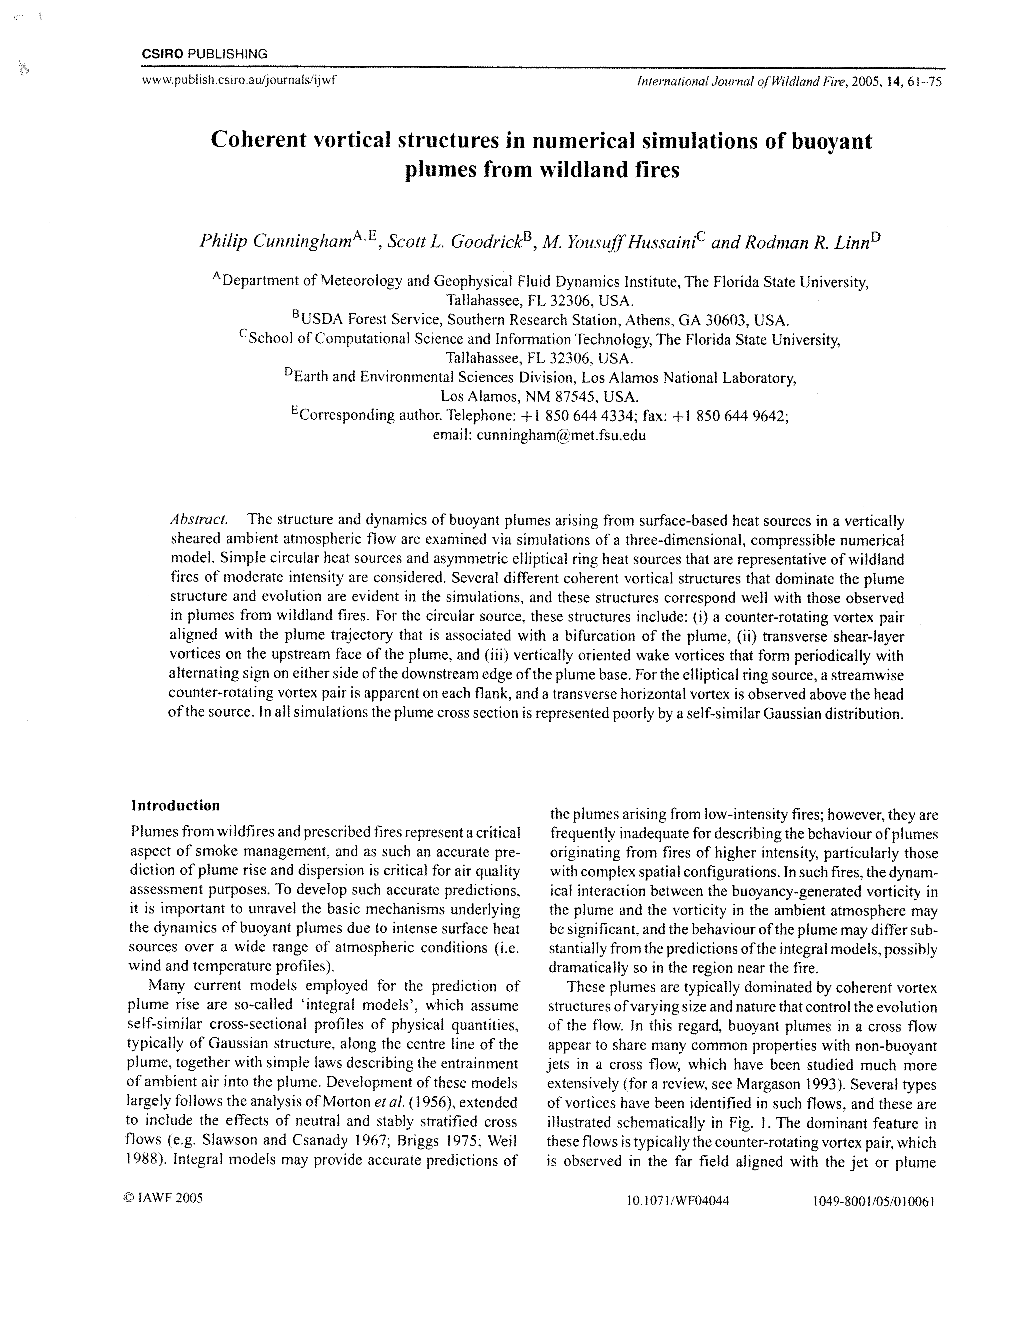 Coherent Vortical Structures in Numerical Simulations of Buoyant Plumes from Wildland Fires